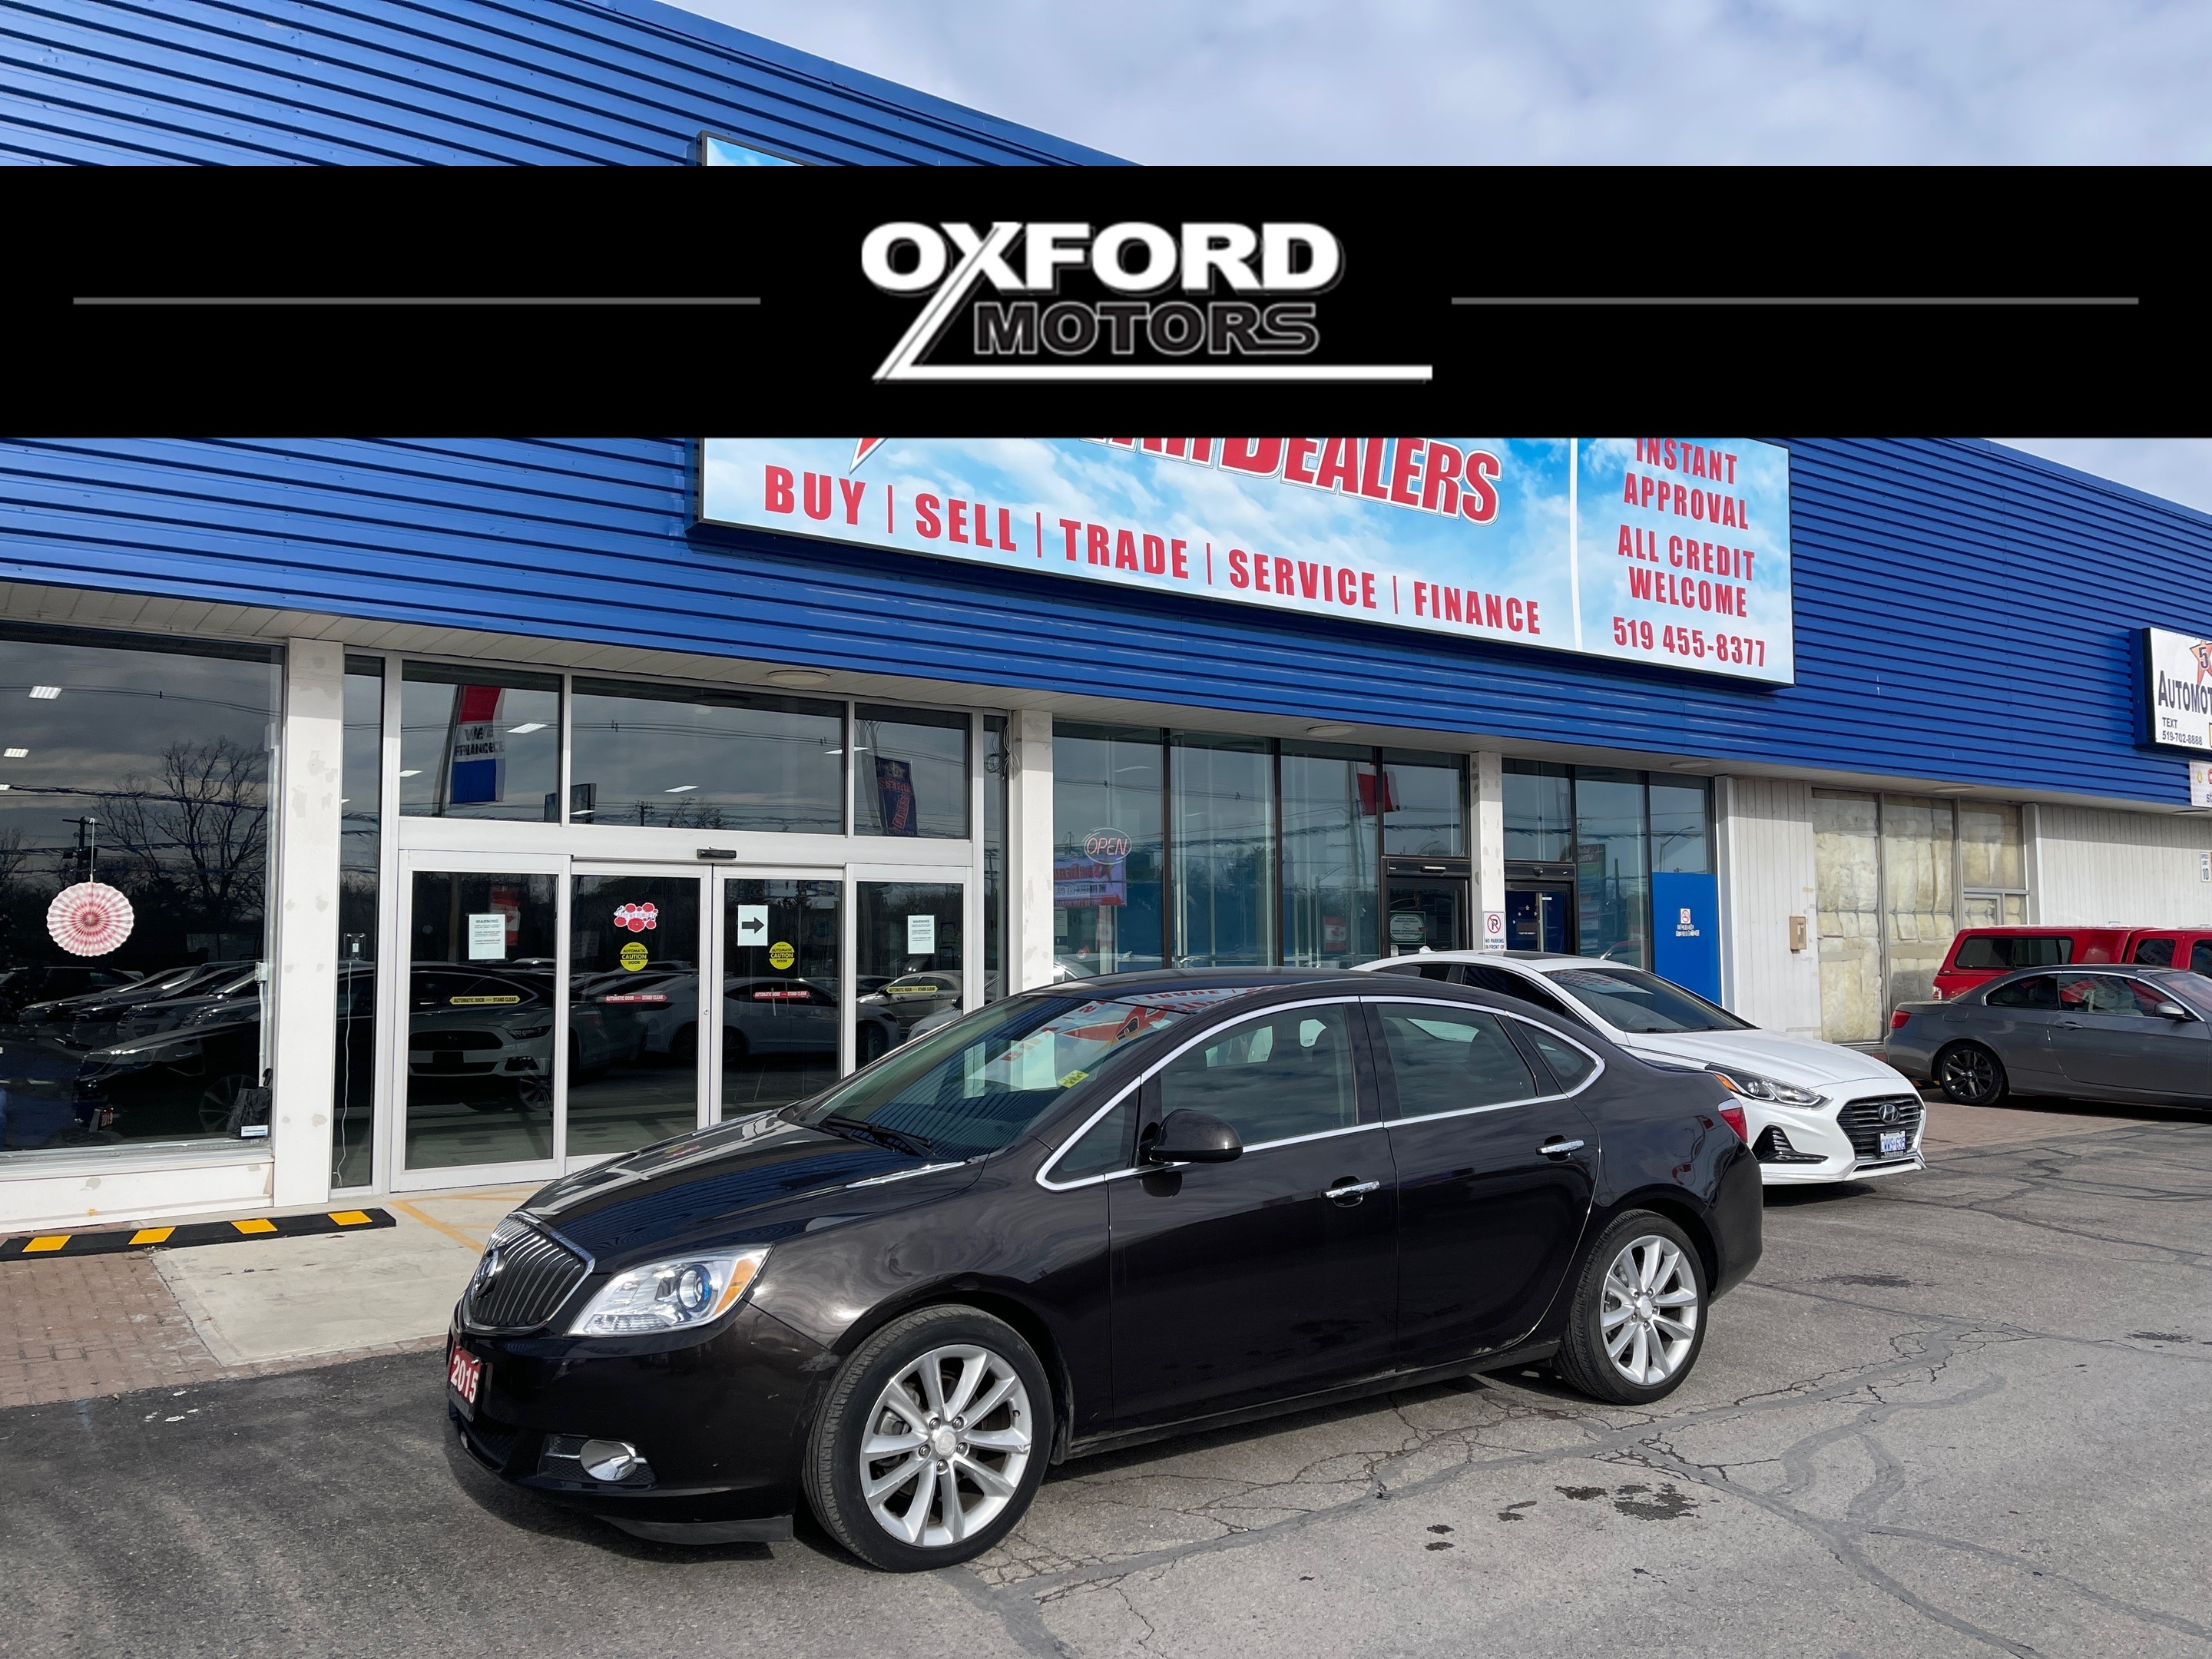 2015 Buick Verano NAV LEATHER H-SEATS LOADED! WE FINANCE ALL CREDIT!